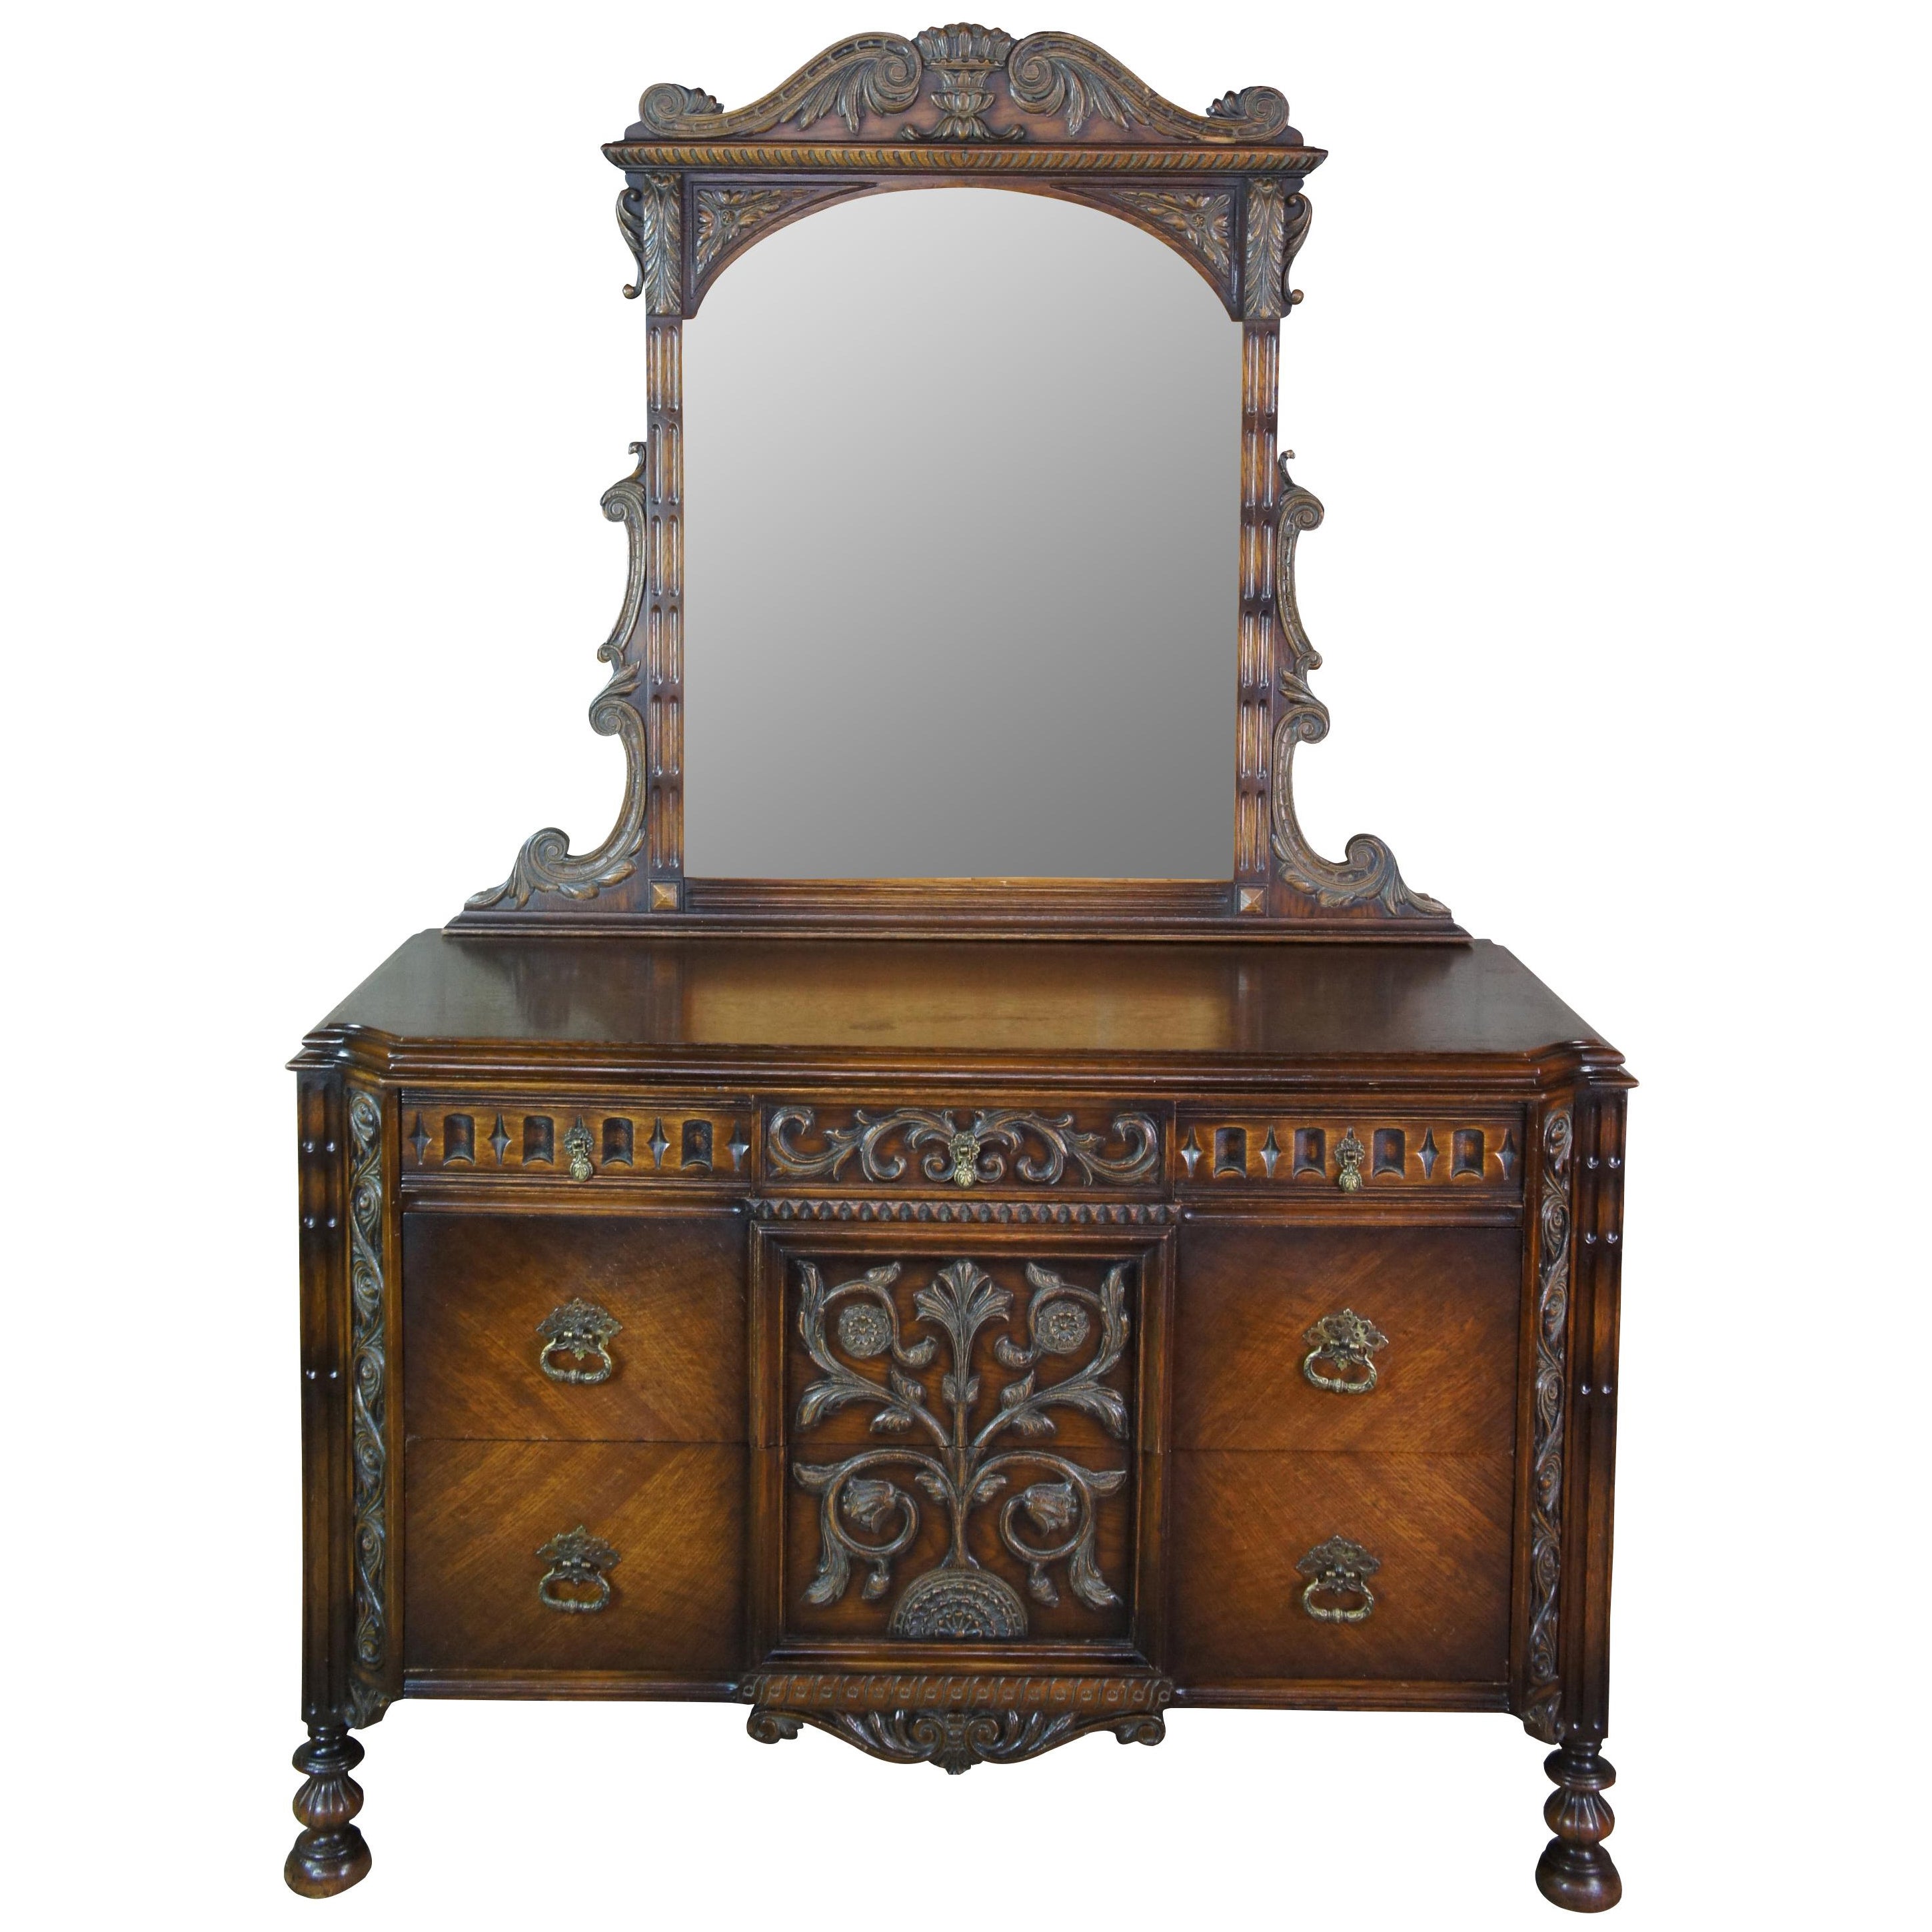 American Furniture Gothic Revival Oak Mirrored Vanity Dresser Chest of Drawers 7